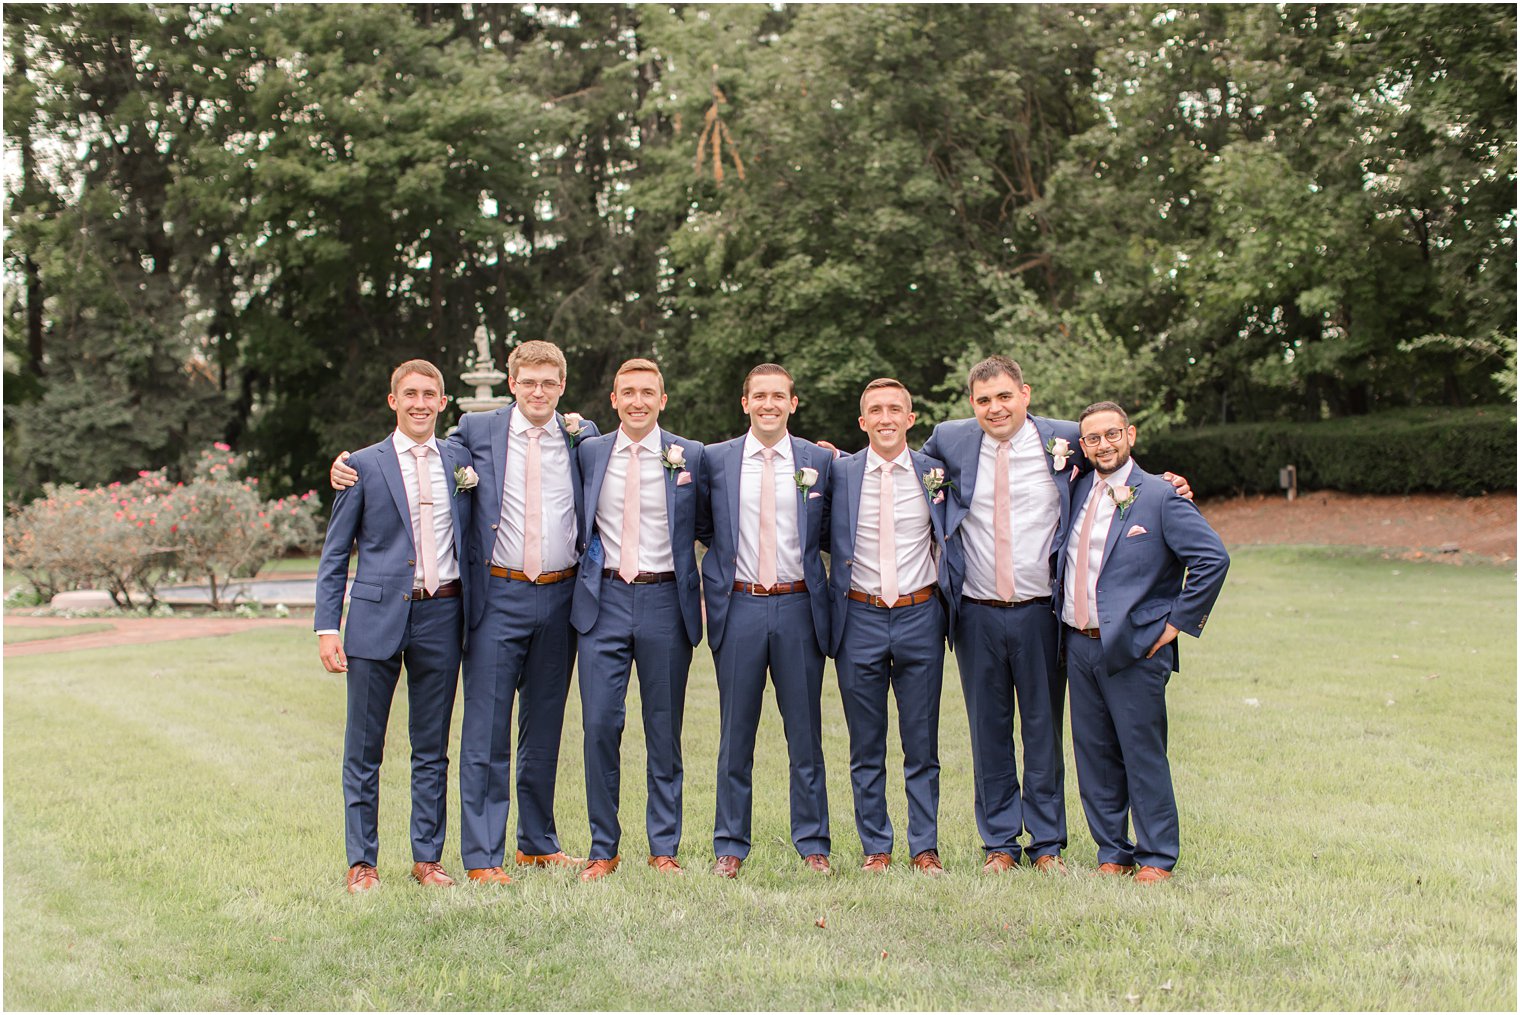 Relaxed photo of groomsmen on wedding day